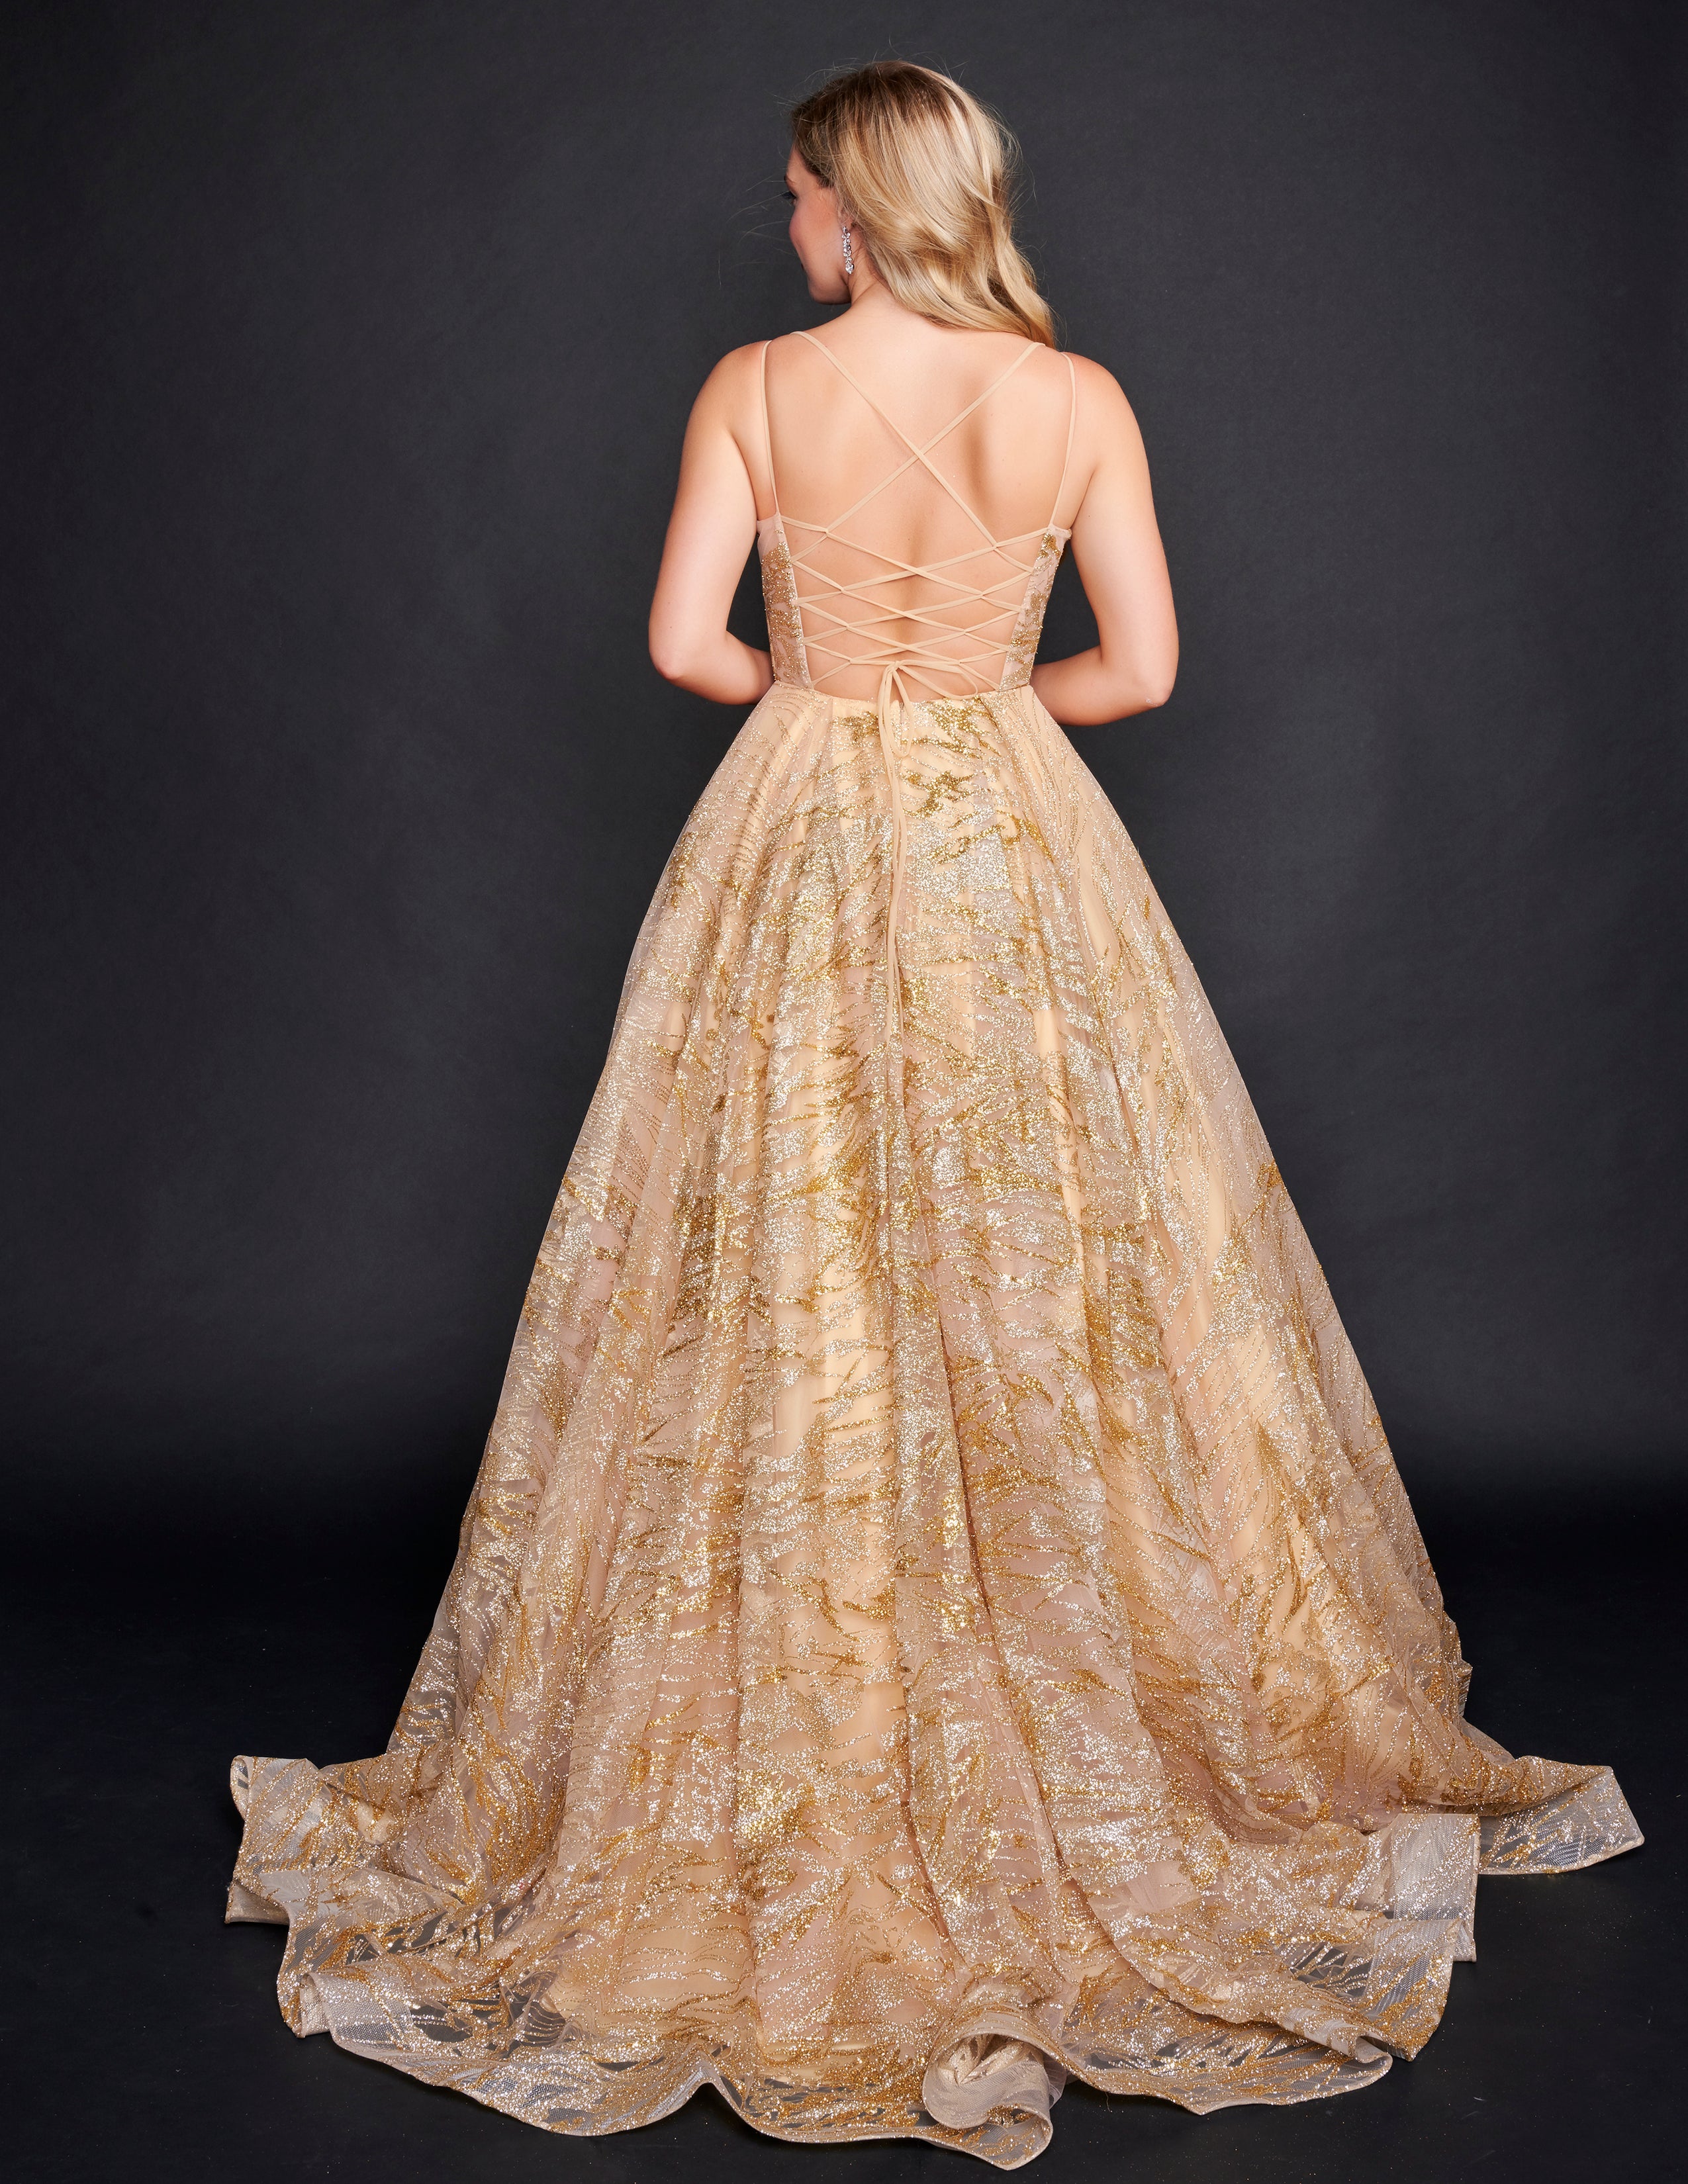 Noelle Victorian Ball Gown | Recollections